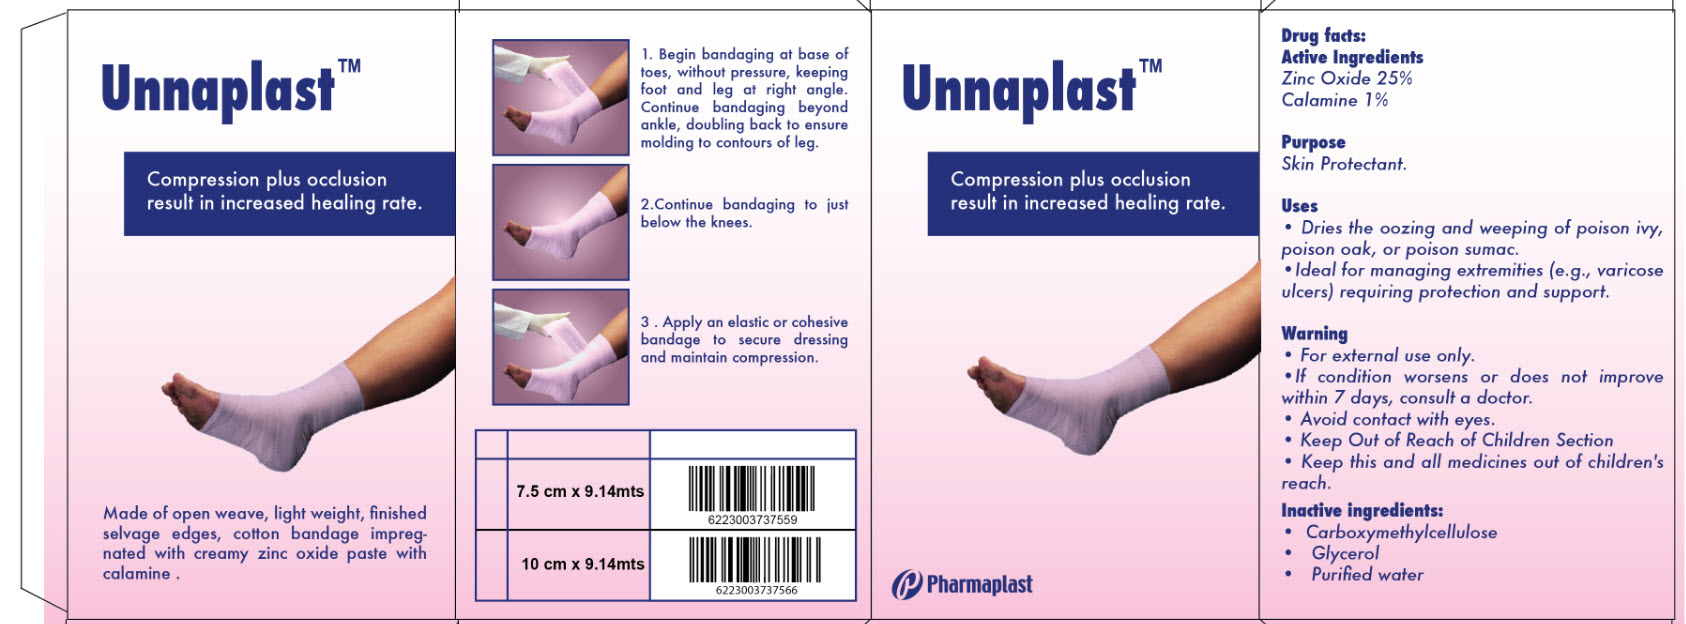 Unnaplast™ Compression Plus occlusion result in increased healing rate. 7.5 cm x 9.14 mts 10 cm x 9.14 mts